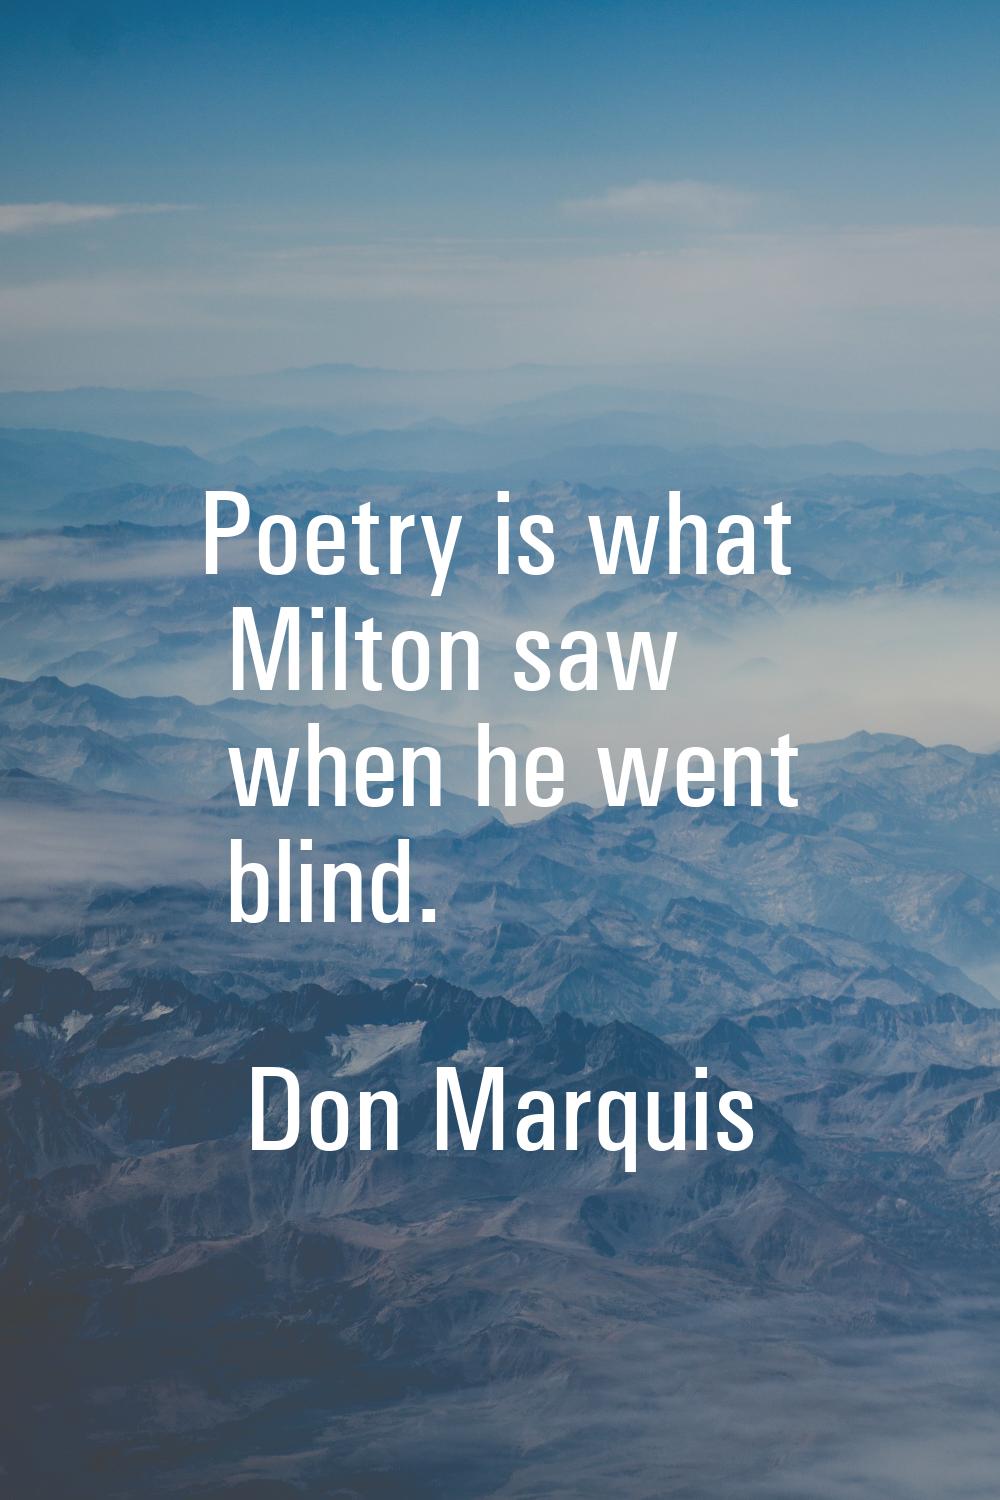 Poetry is what Milton saw when he went blind.